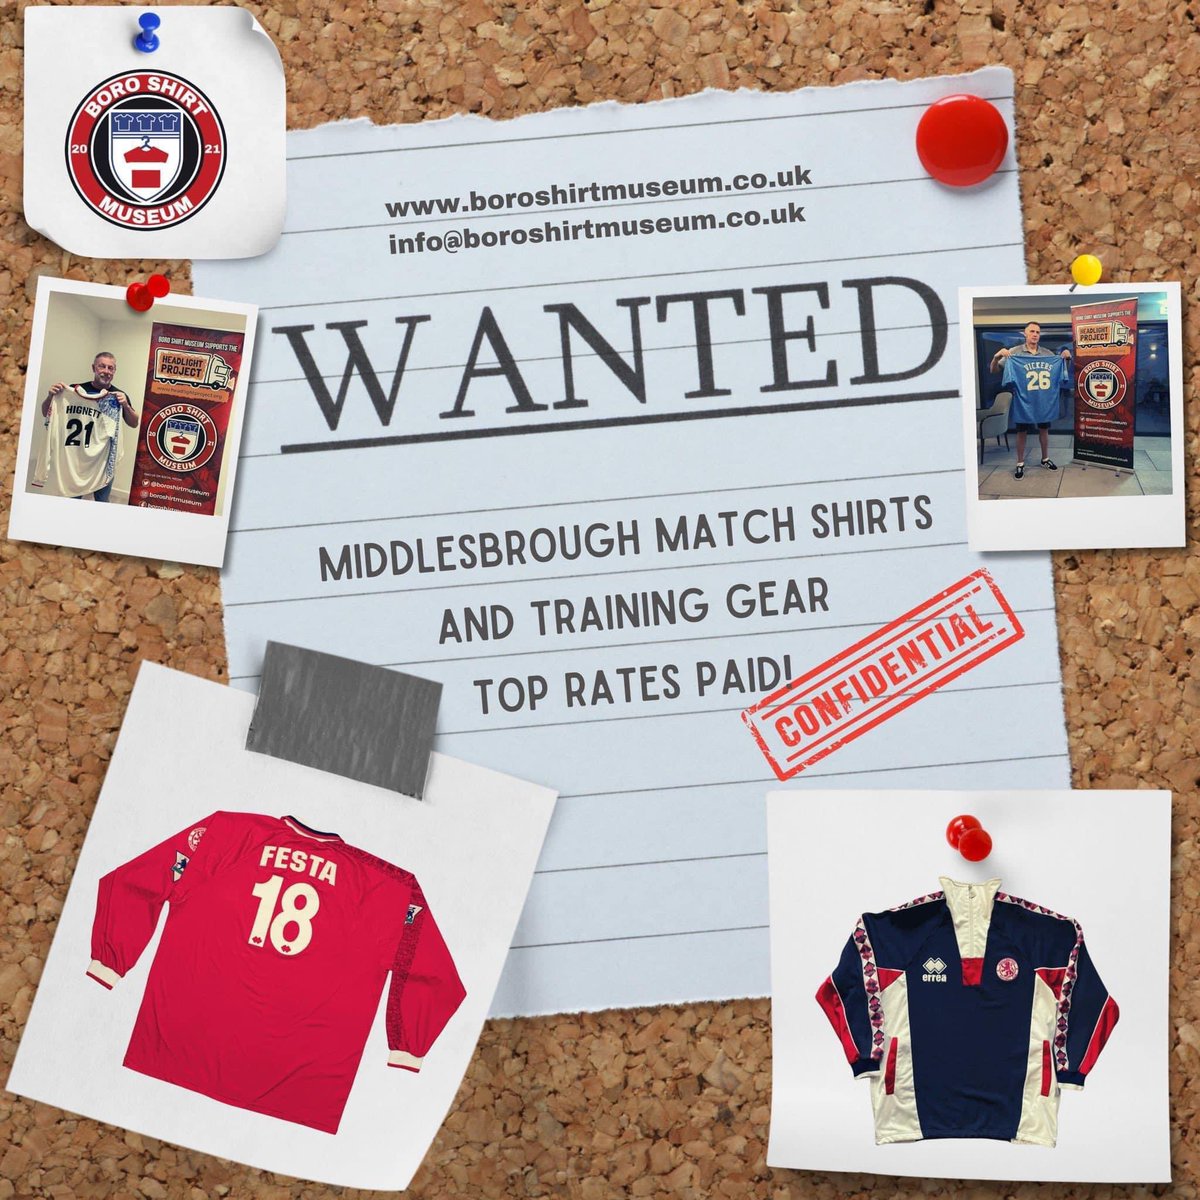 WANTED | As we’re approaching our biggest exhibition yet, we’re on the hunt for special Boro-related shirts and memorabilia. Confidentiality guaranteed, as always, Please feel free to get in touch. Thank you.